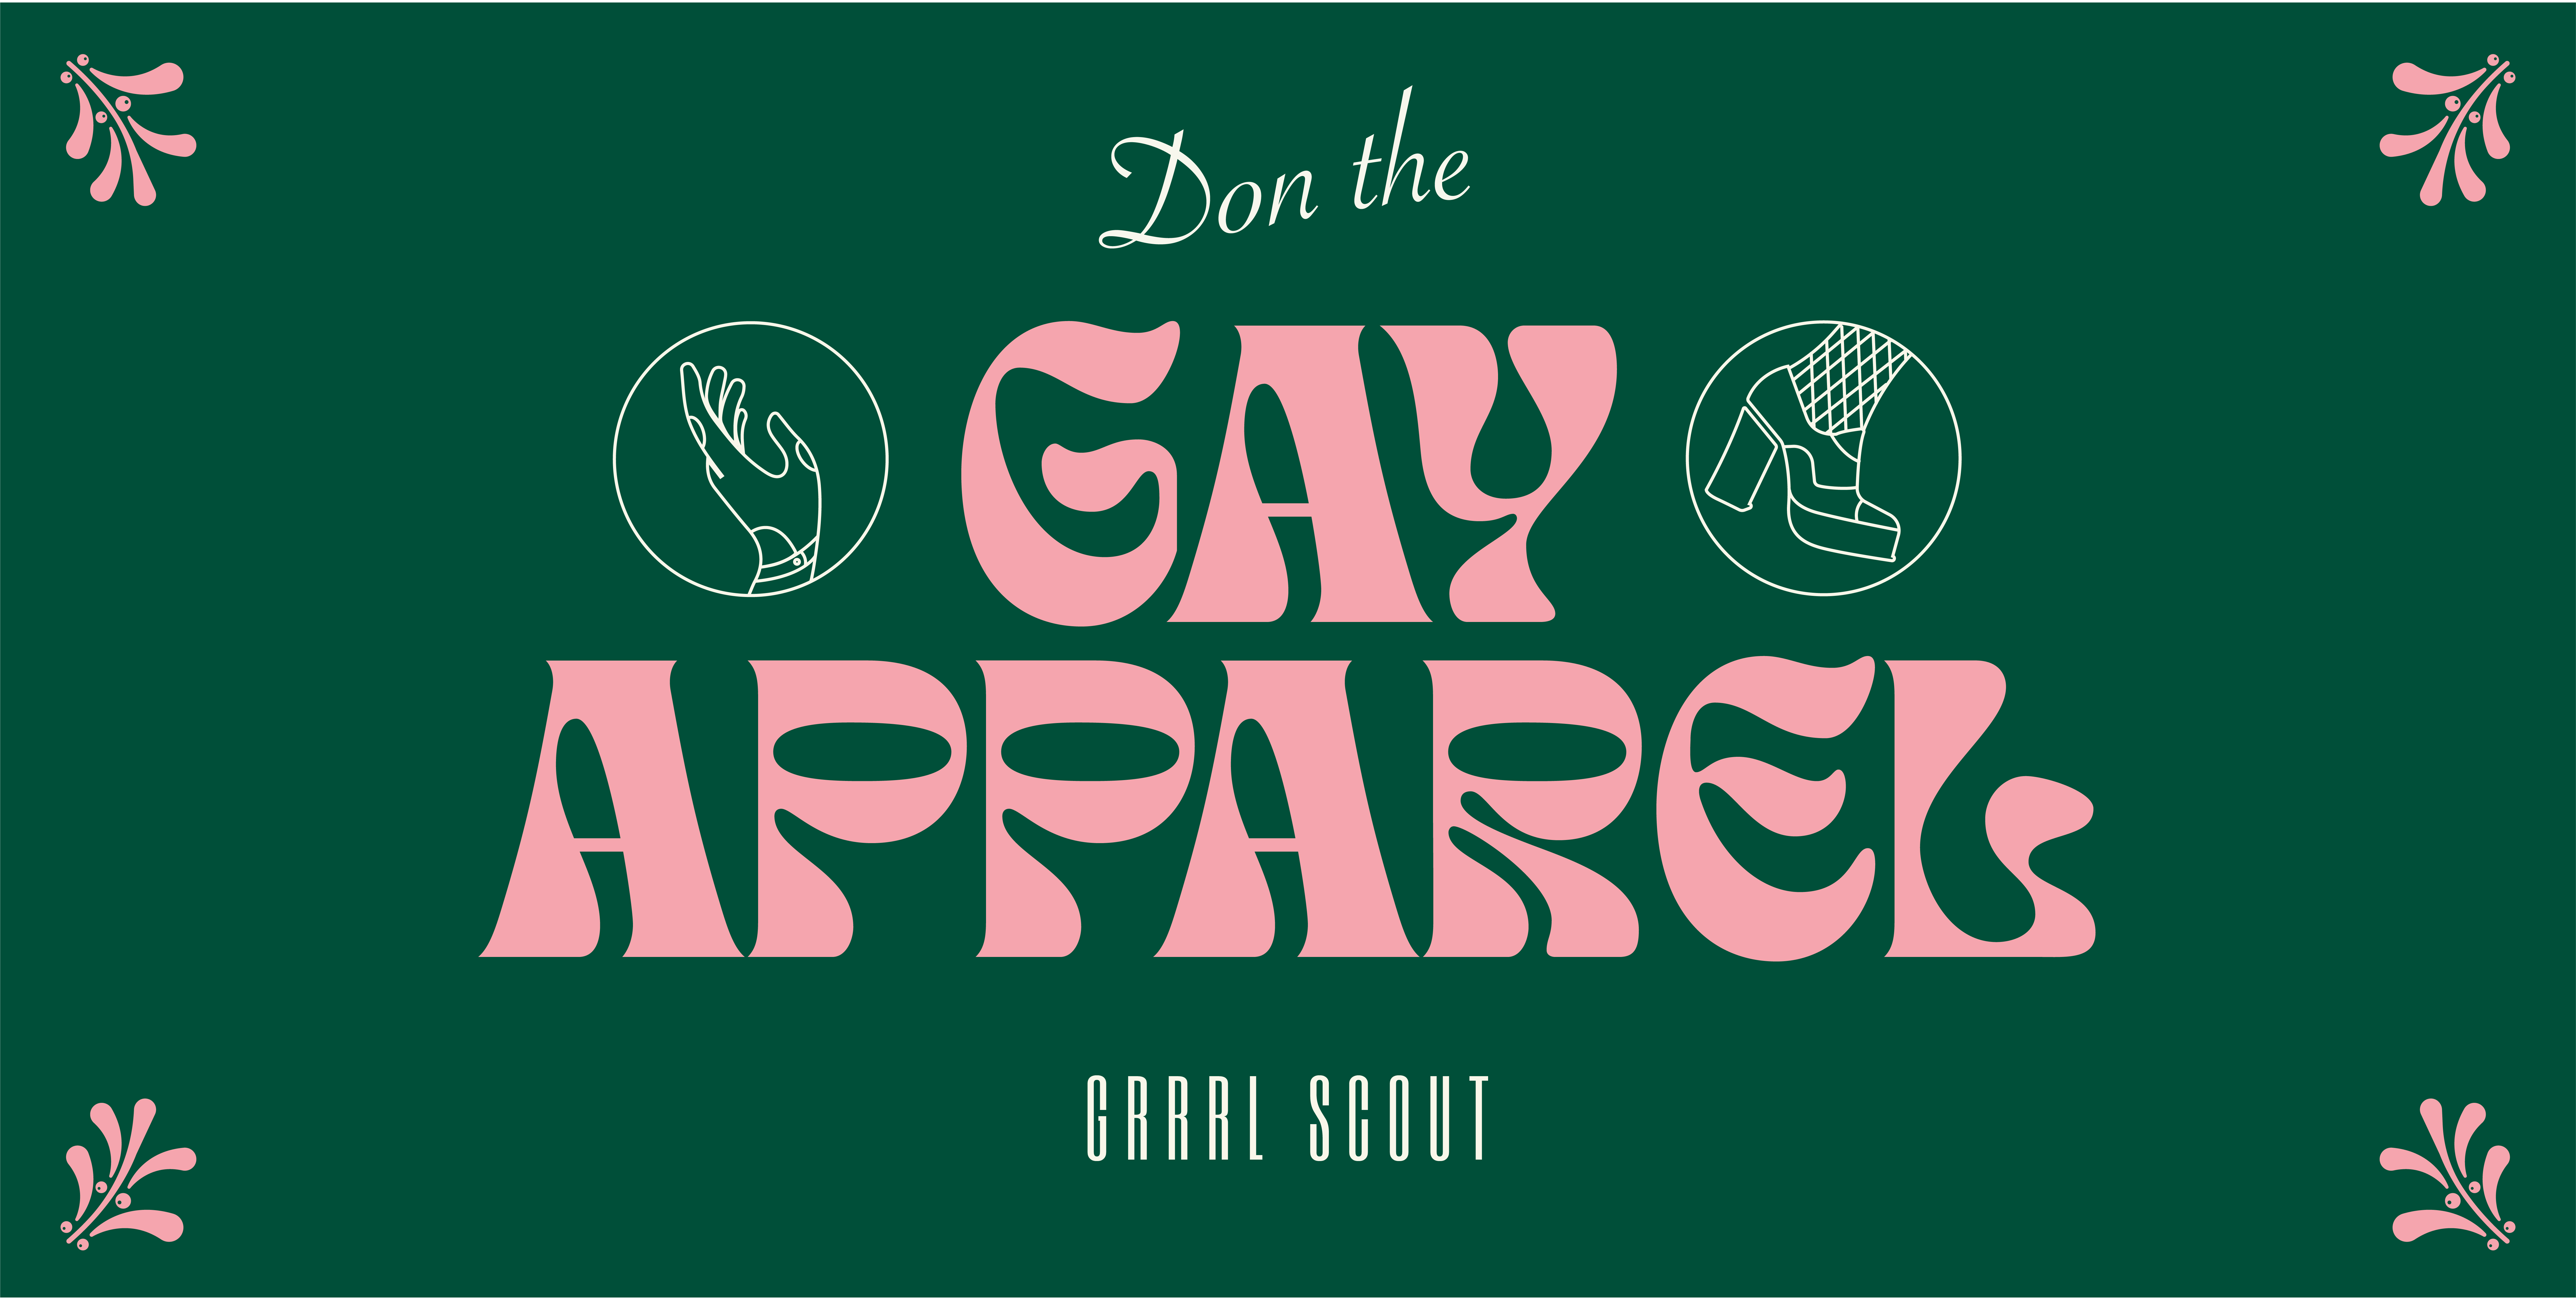 December GRRRL SCOUT: Don the GAY APPAREL Date:12/10/2022 Hook and Ladder/Mission Room 21+ Time: 9:30 p.m. – 1:00 a.m. General Admission*: $20 Early / $25 Advance / $30 Day of Show *Note: Additional fees may apply